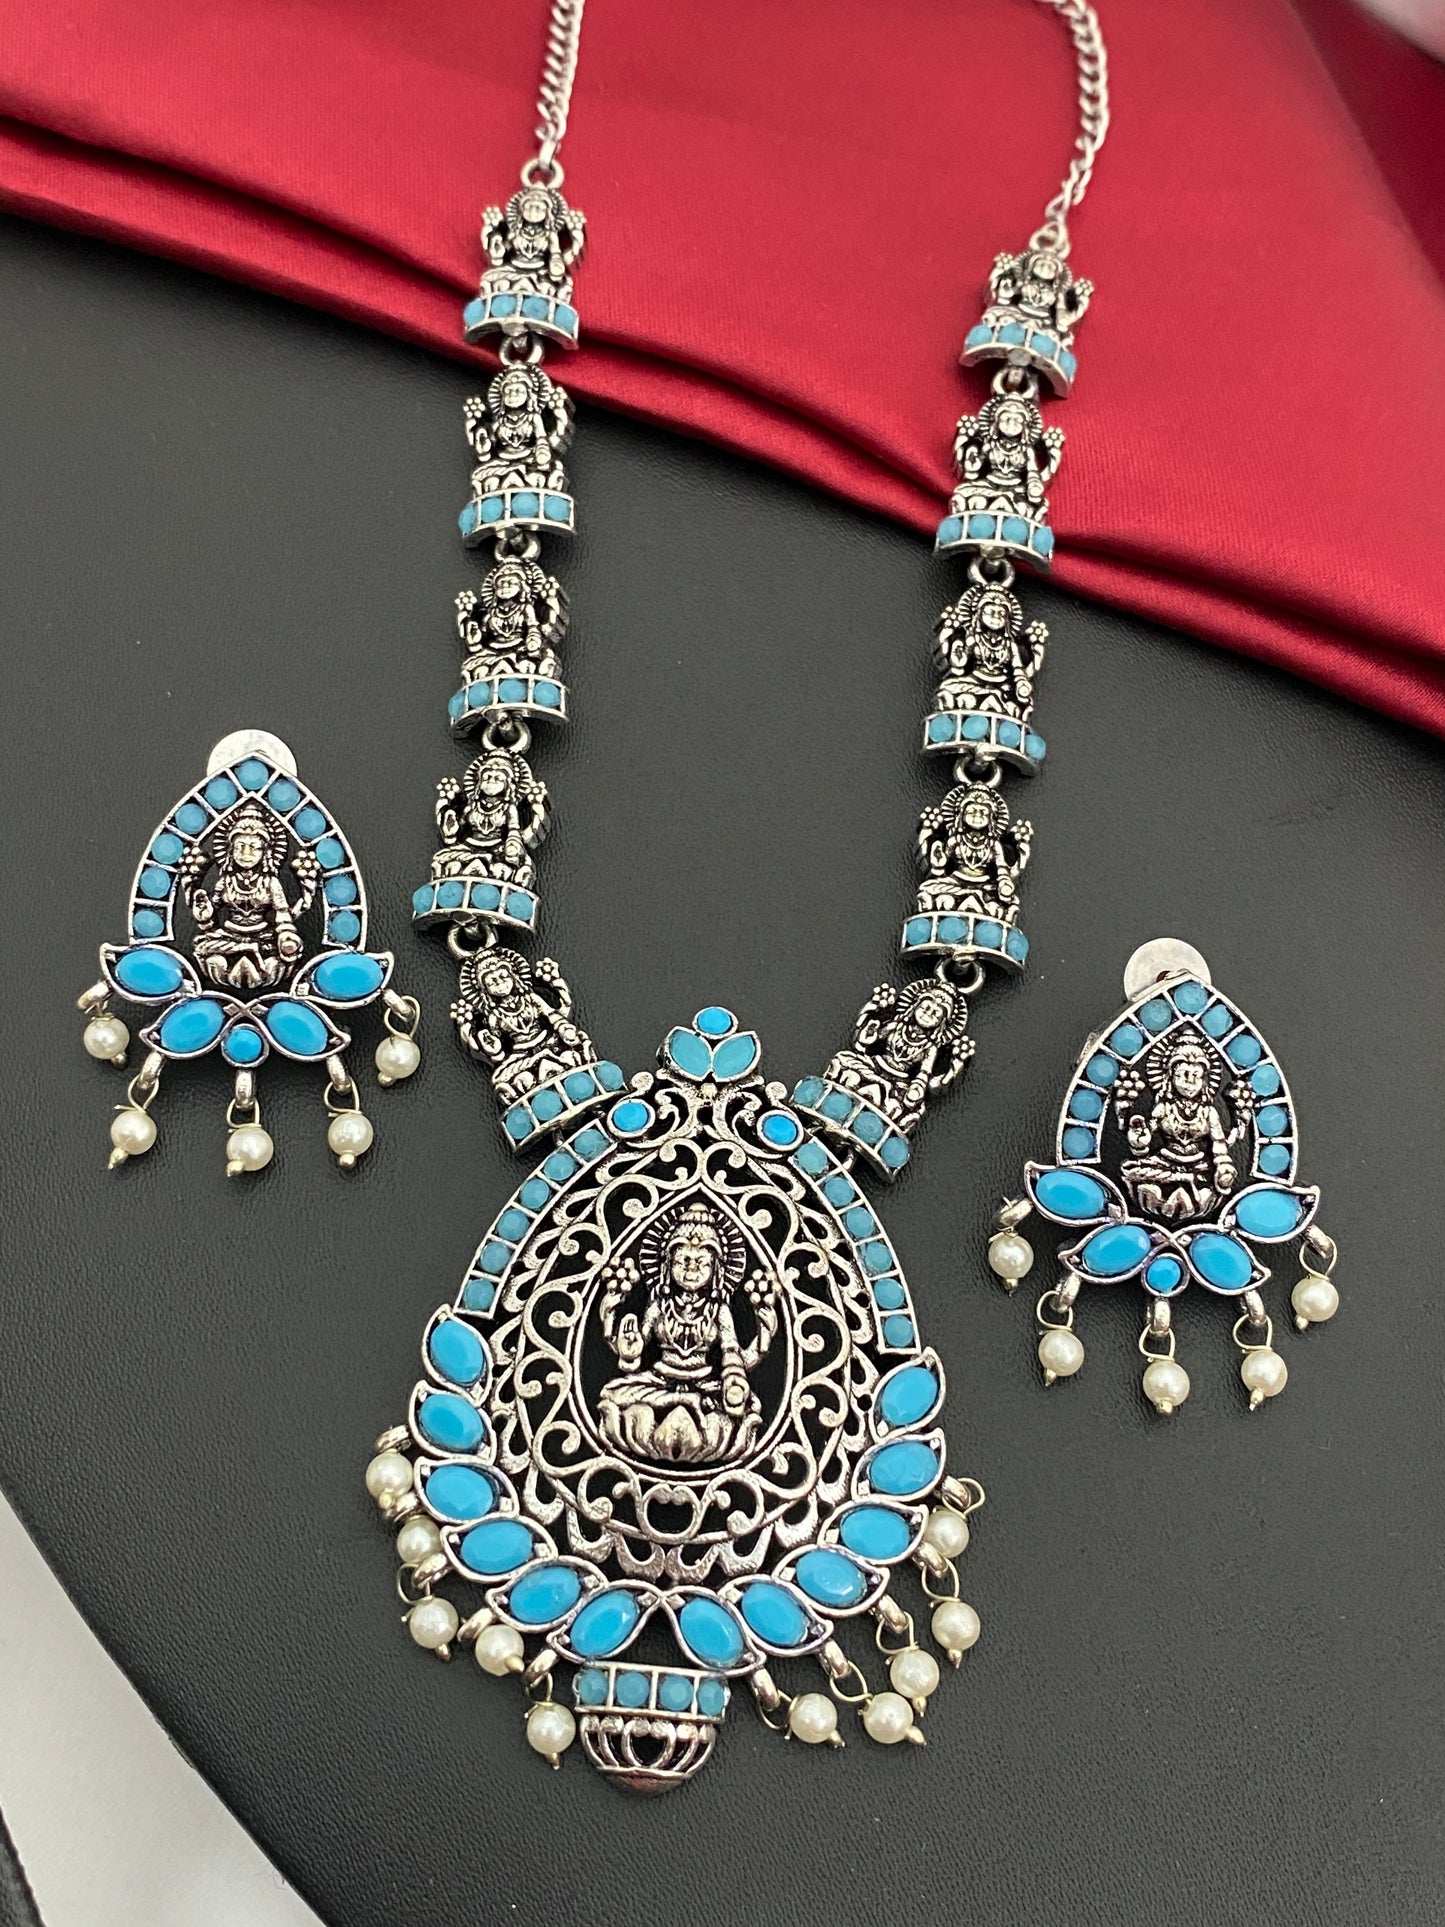 Sizzling Blue Stone Studded Lakshmi Pendant Temple Jewelry Necklace Set With Earrings